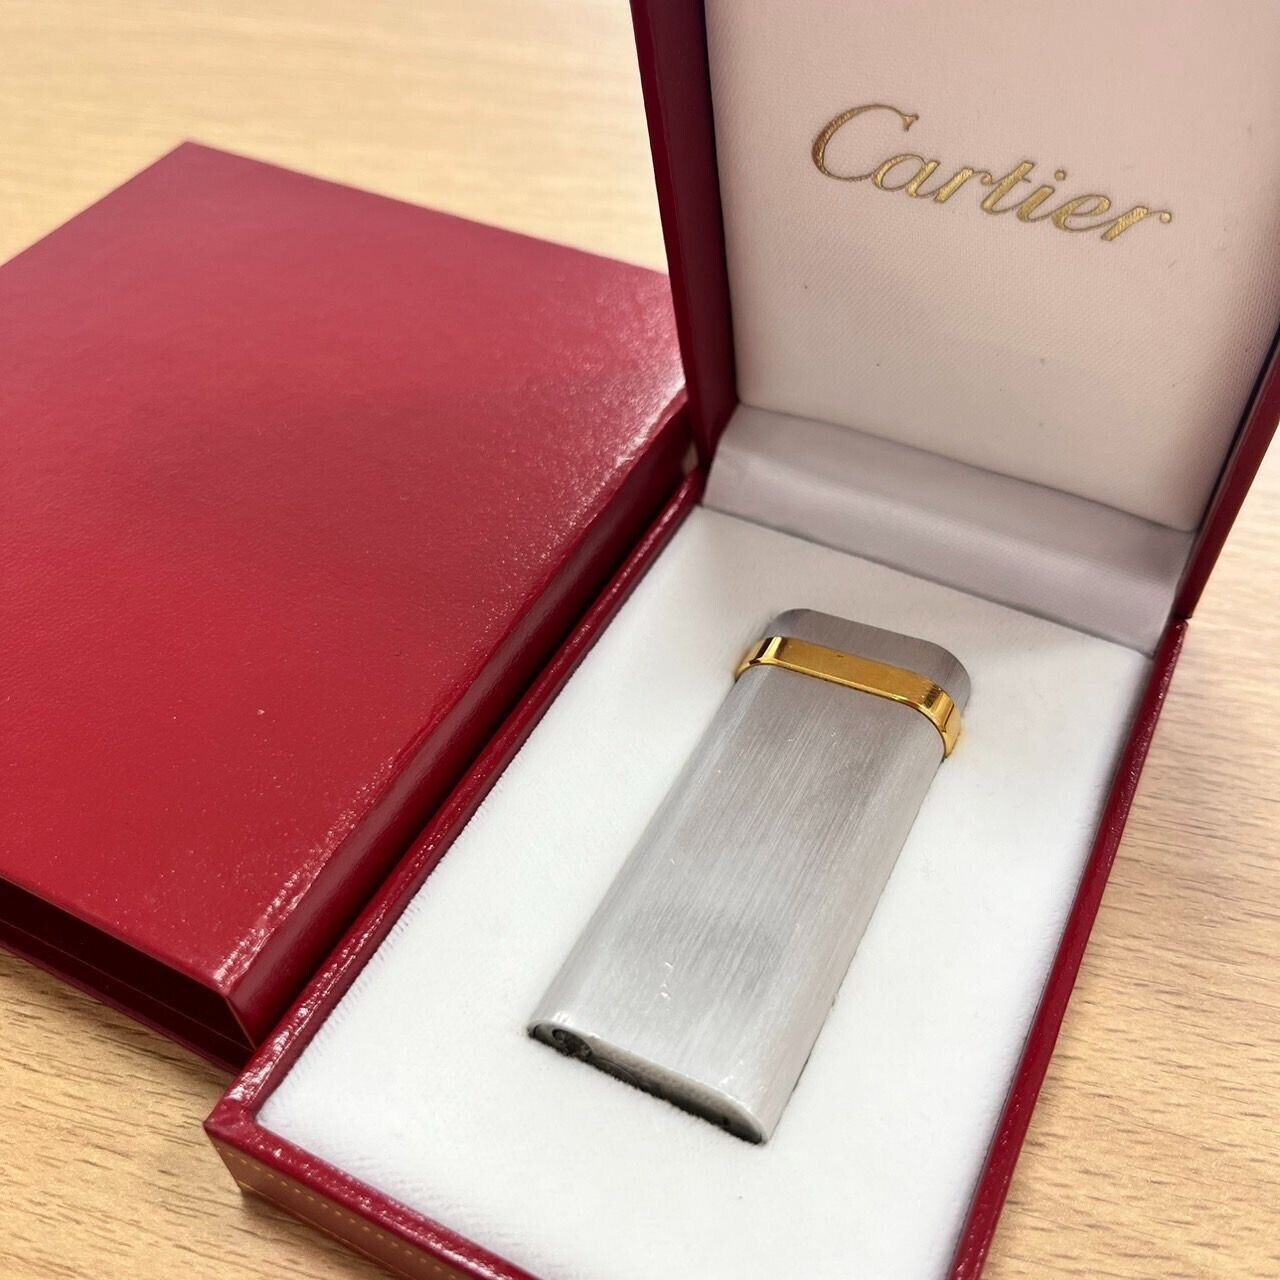 Cartier Gas Lighter silver gold with box